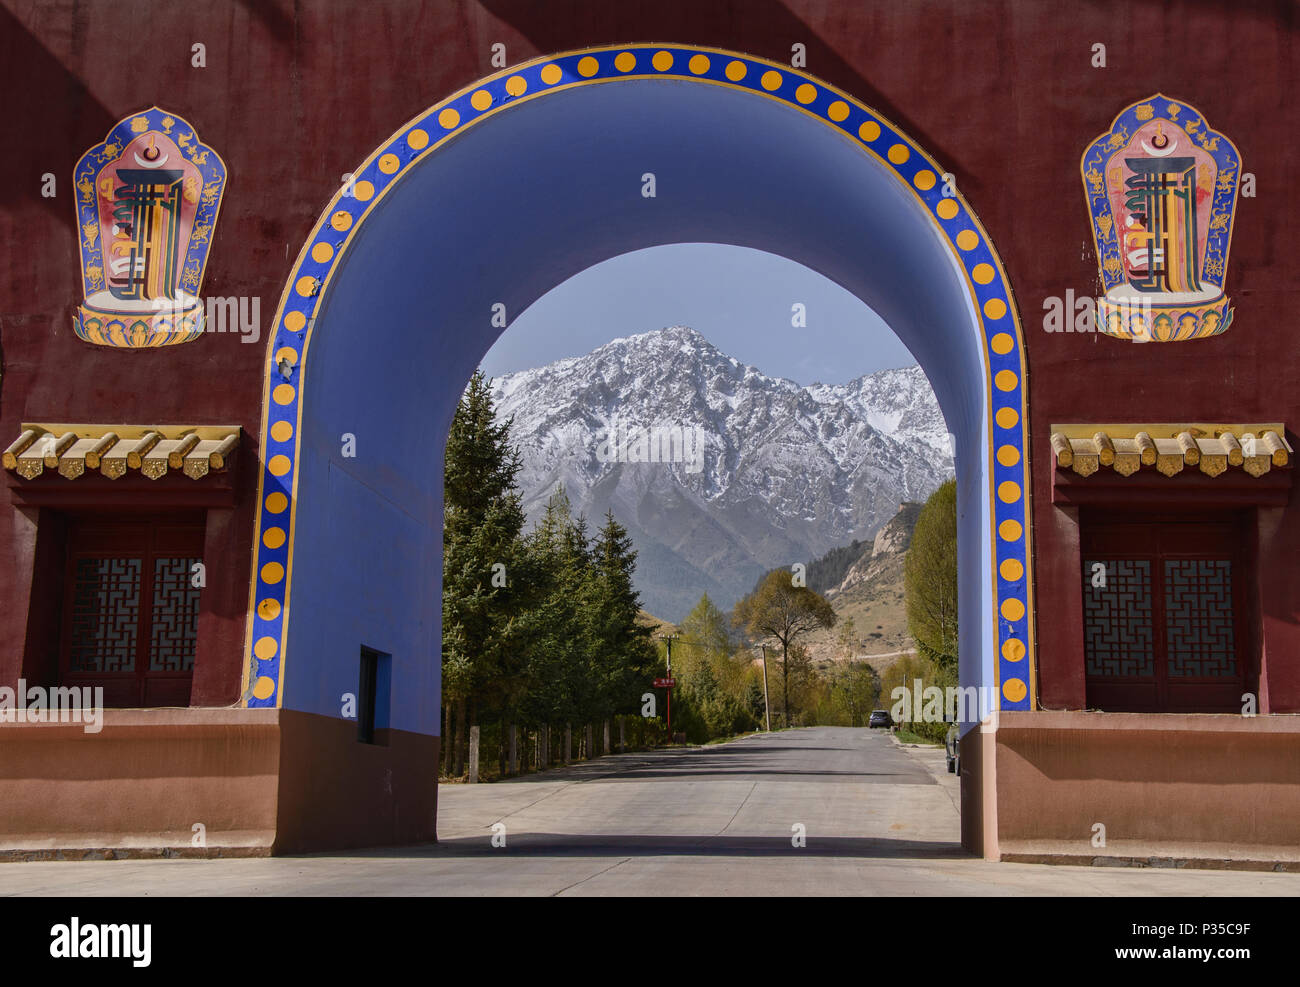 View of the Qilian Mountains from the Mati Si Temples, Gansu, China Stock Photo